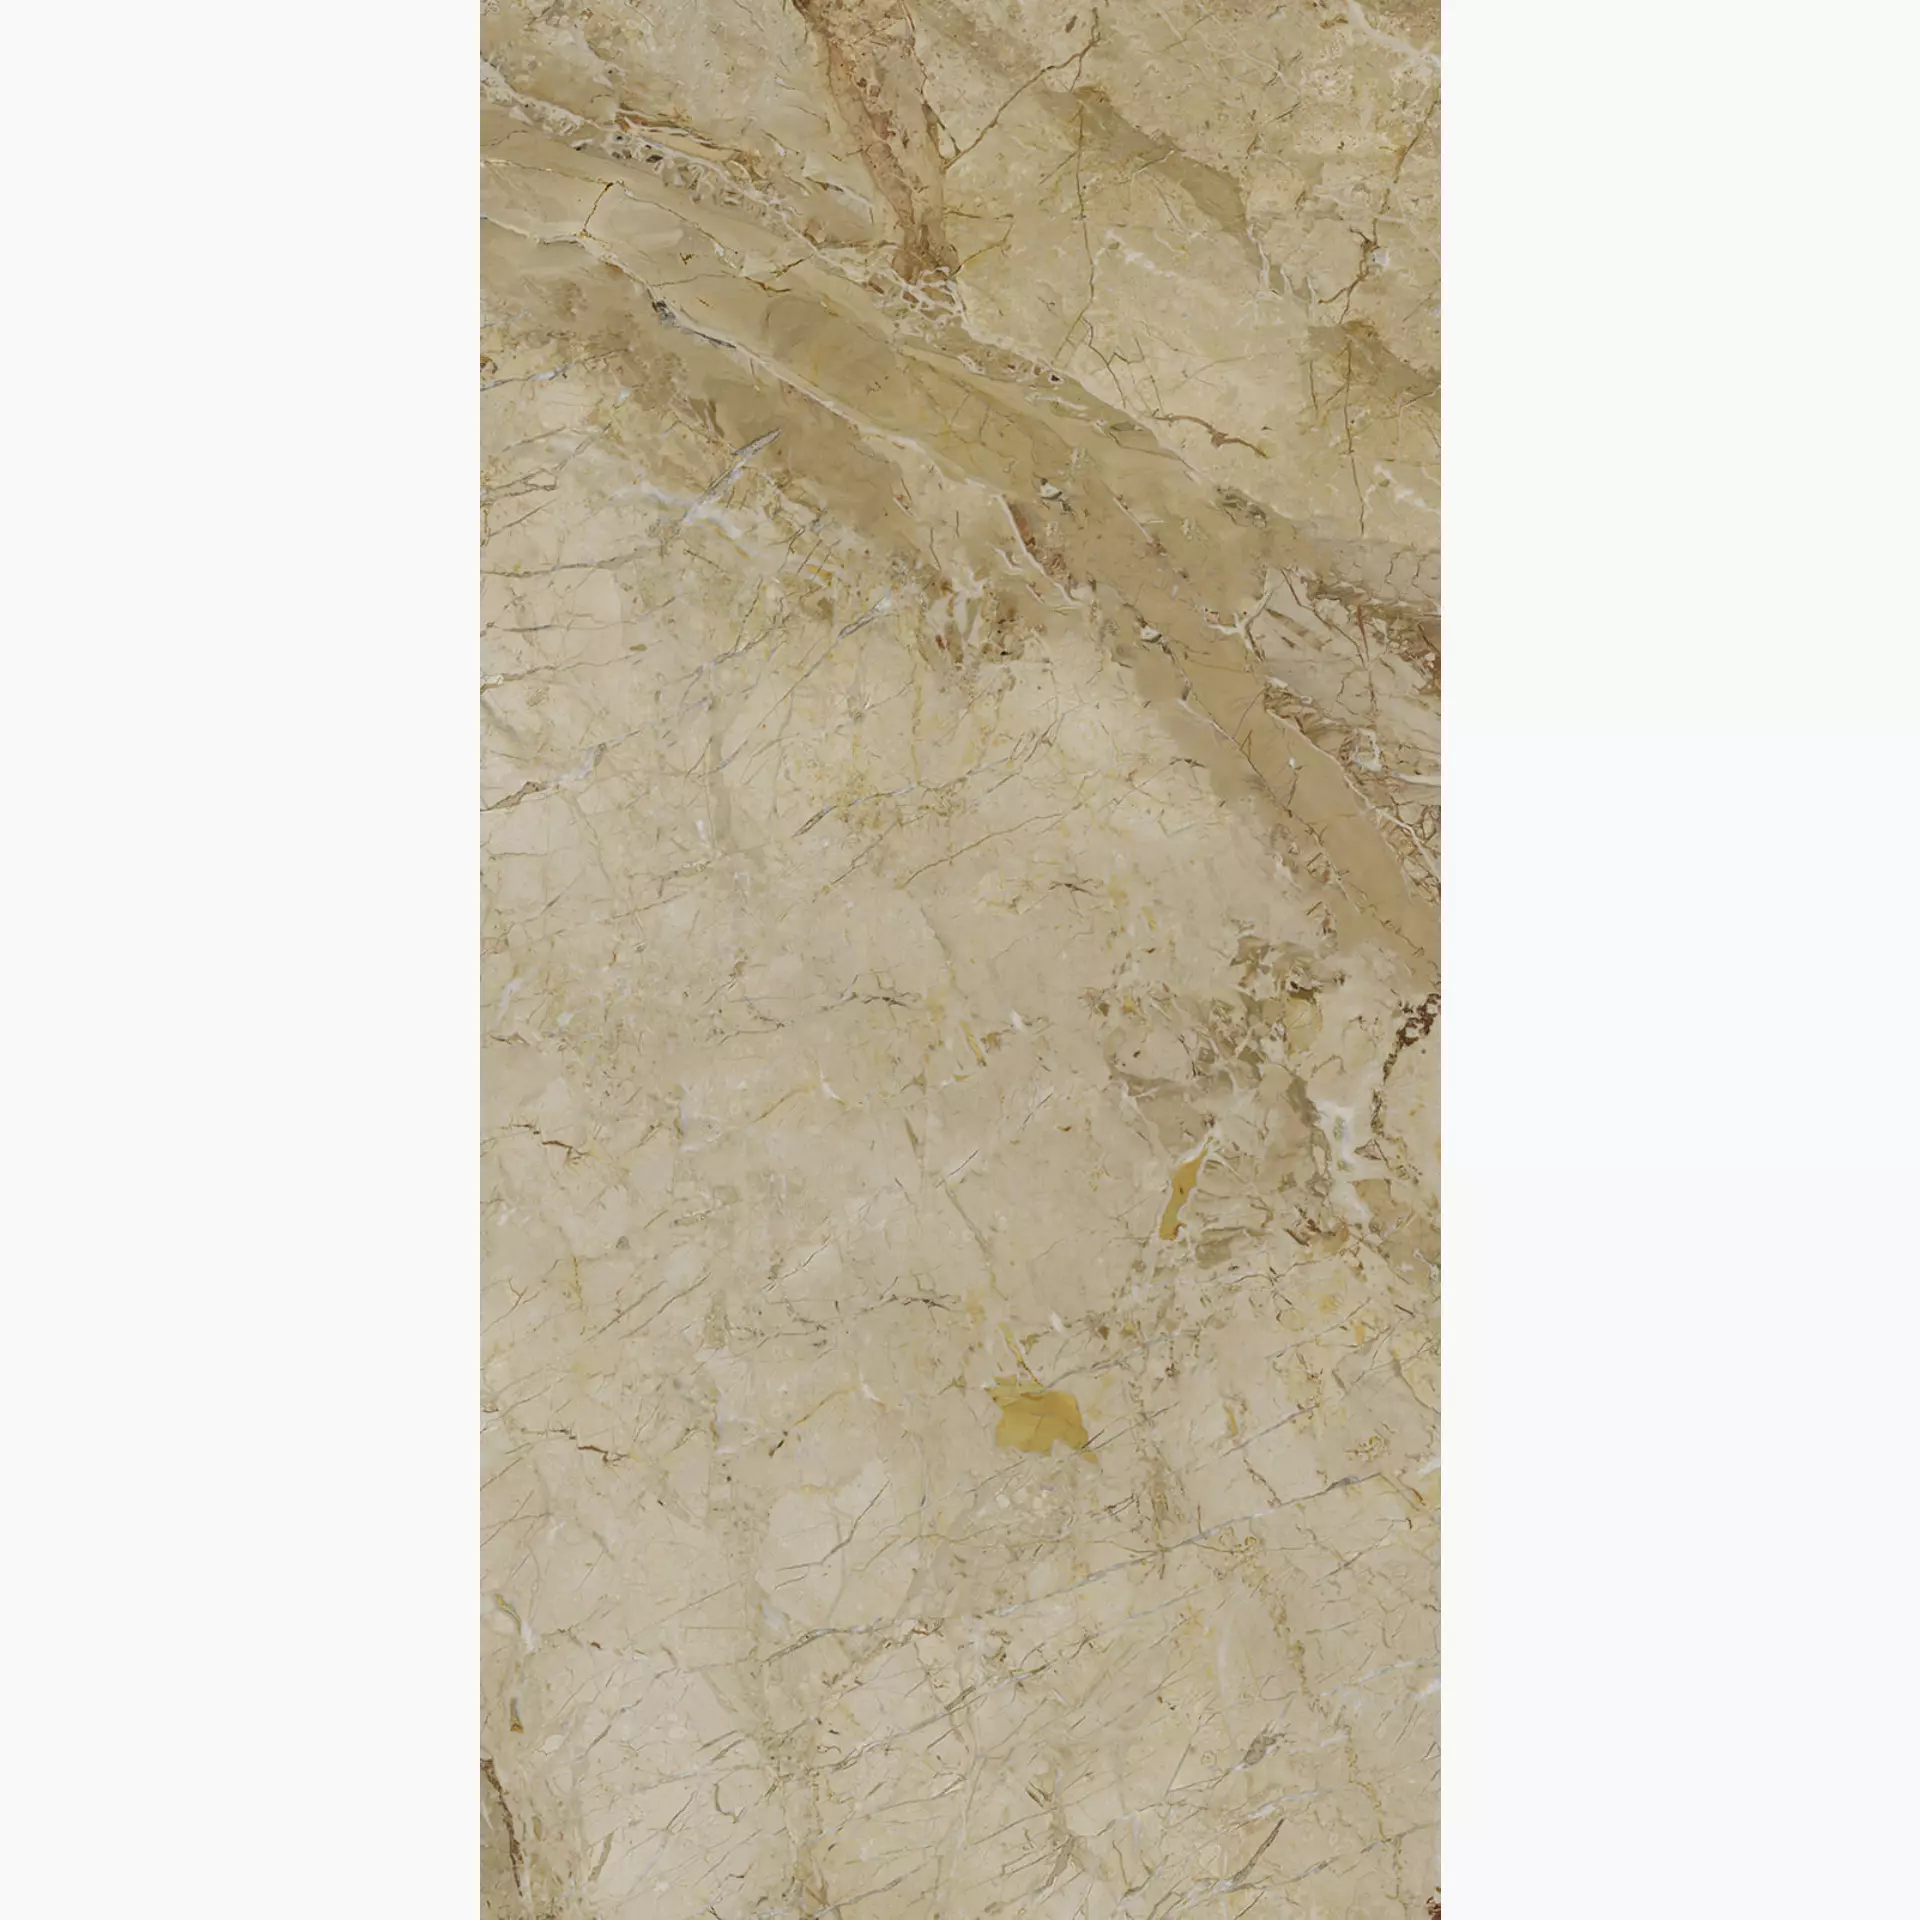 Keope 9Cento Aurora Beige Lappato 46394432 60x120cm rectified 9mm